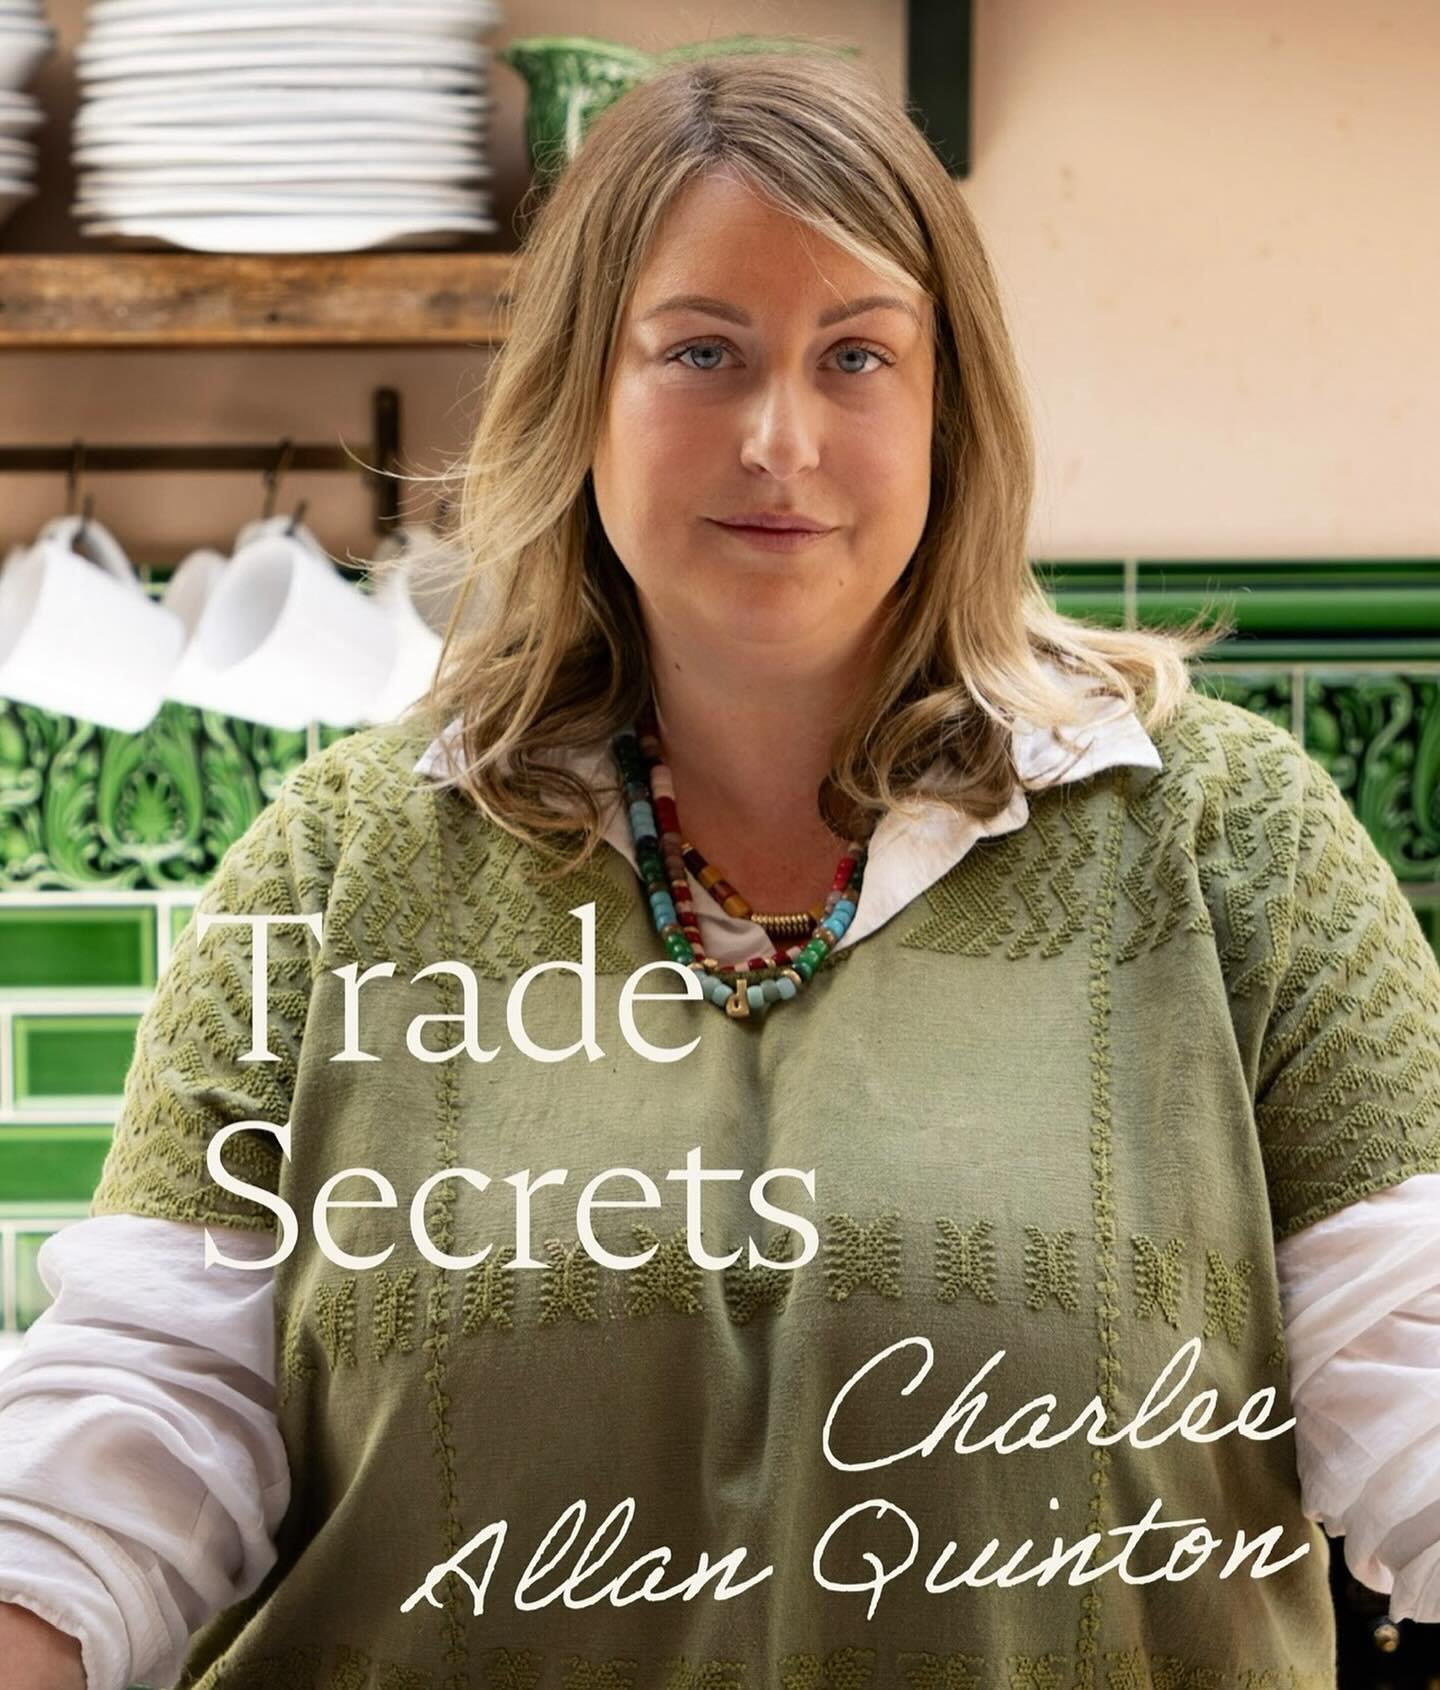 This is me! Thank you to @partnershipeditions for this fantastic feature, it was such a pleasure to shoot with @freya.llewellyn.photography 🤍

'For our first Trade Secrets of the year, we&rsquo;re thrilled to chat with @charleeallanquinton, interior